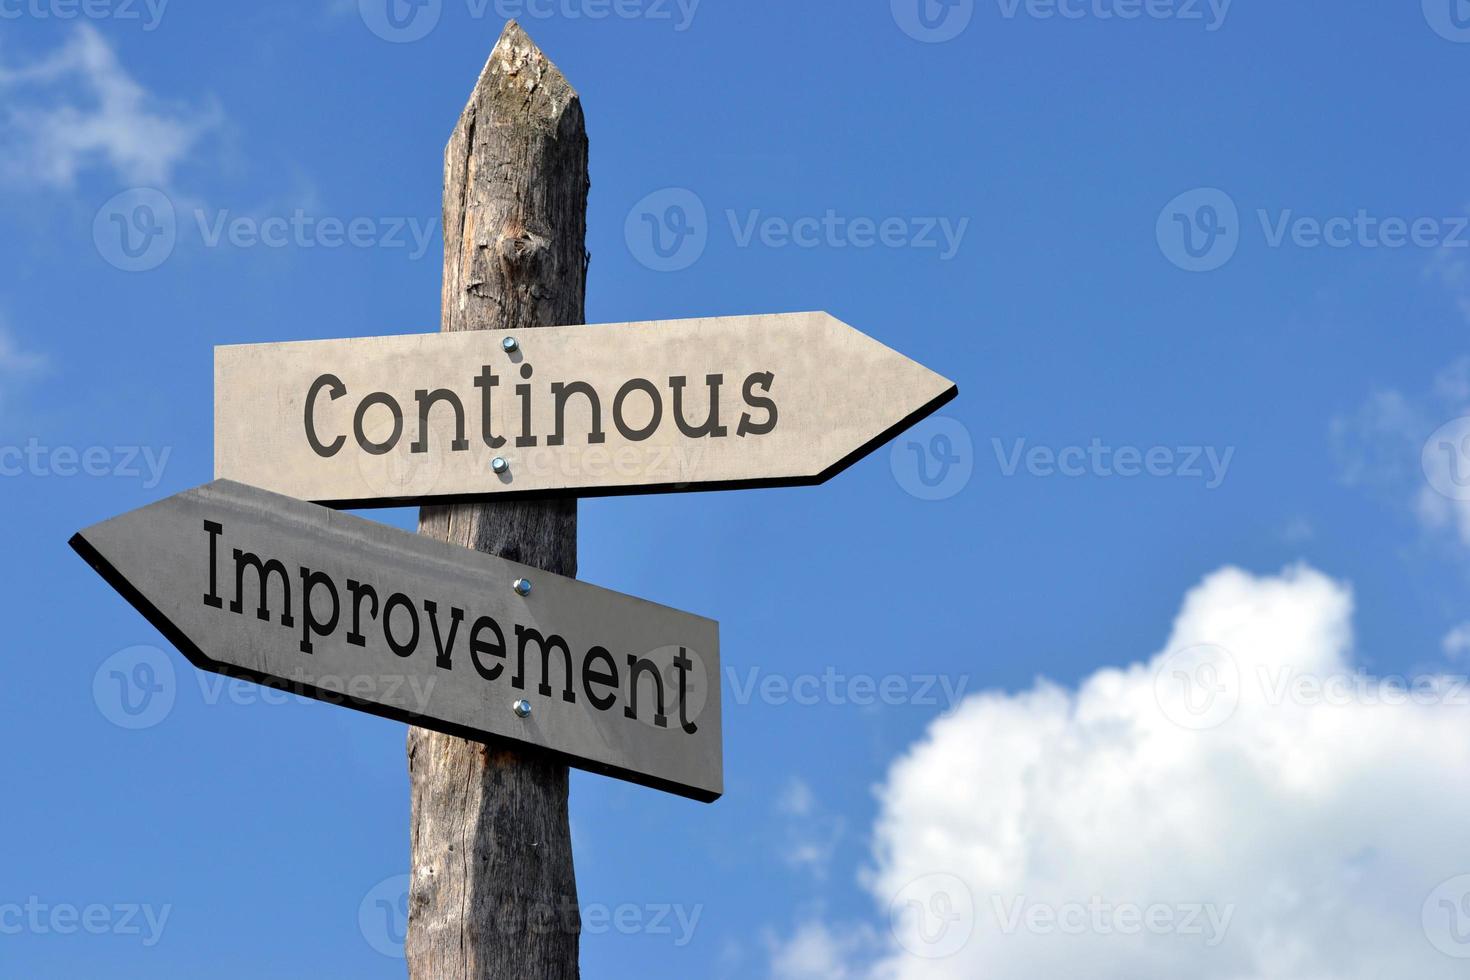 Continous Improvement - Wooden Signpost with Two Arrows, Sky with Clouds photo